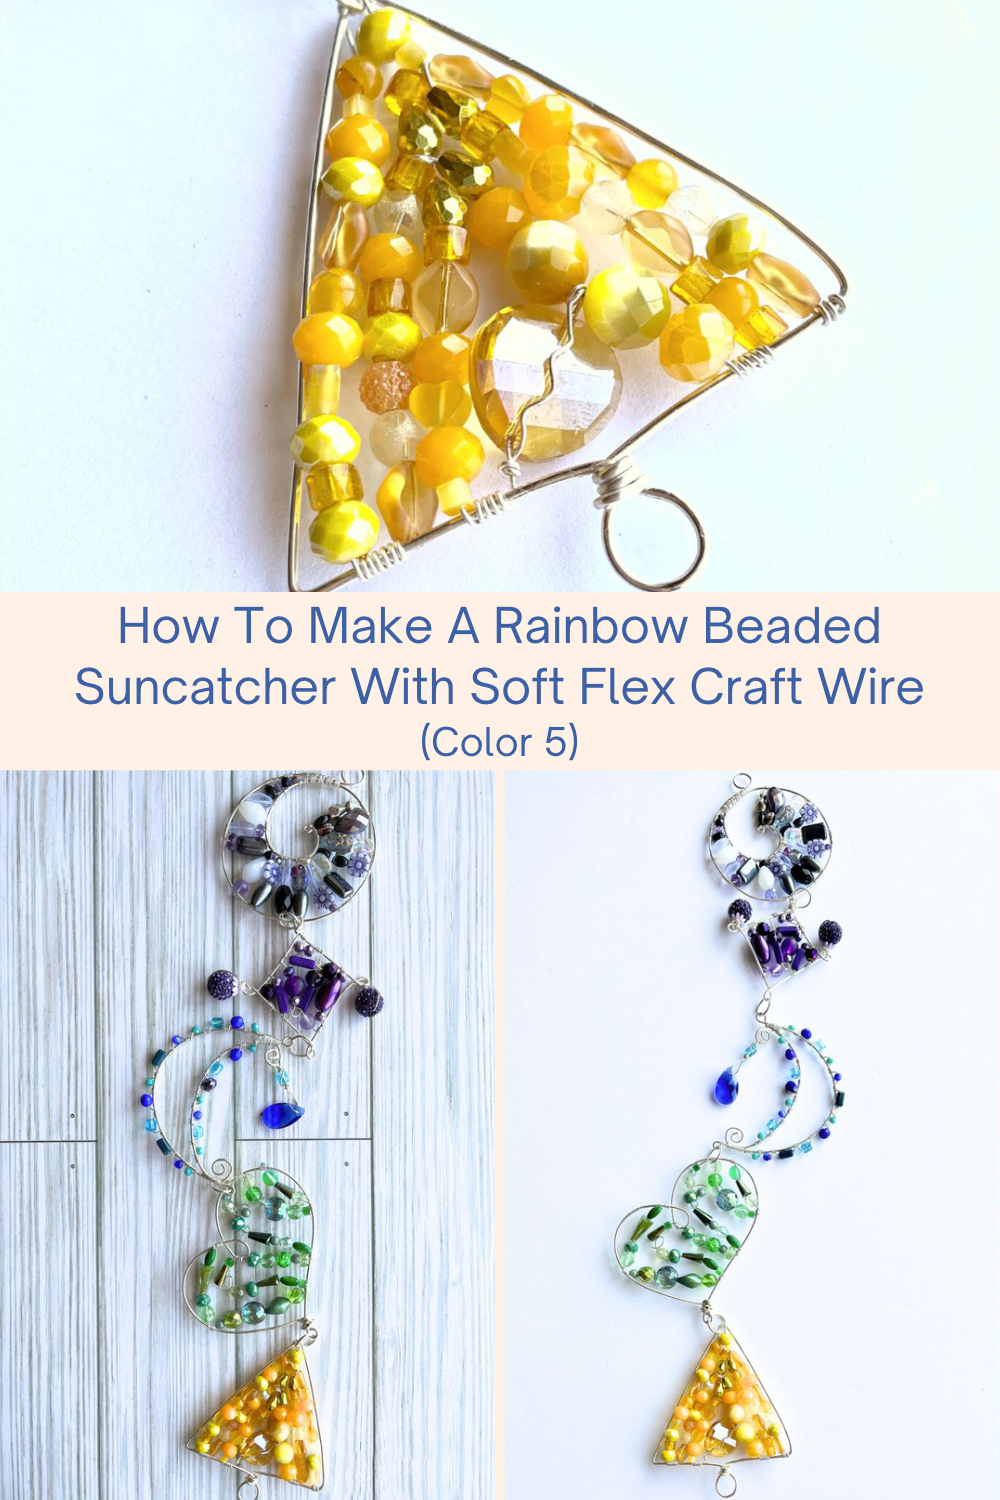 How To Make A Rainbow Beaded Suncatcher With Soft Flex Craft Wire (Color 5) Collage